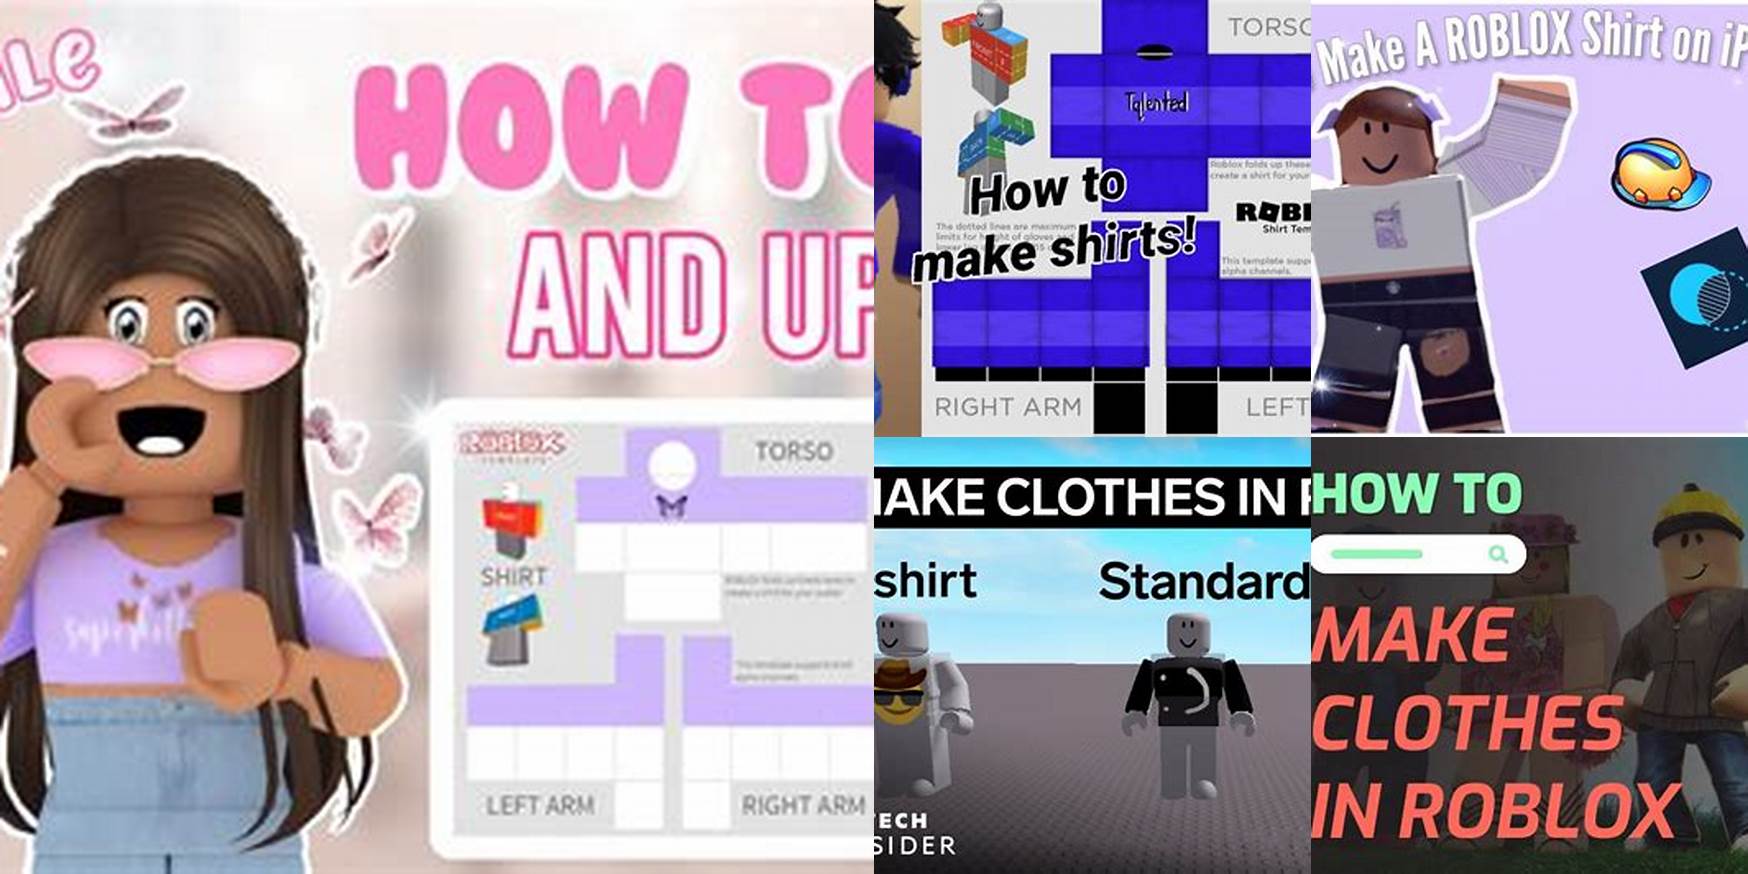 HOW TO MAKE A SHIRT ON ROBLOX MOBILE